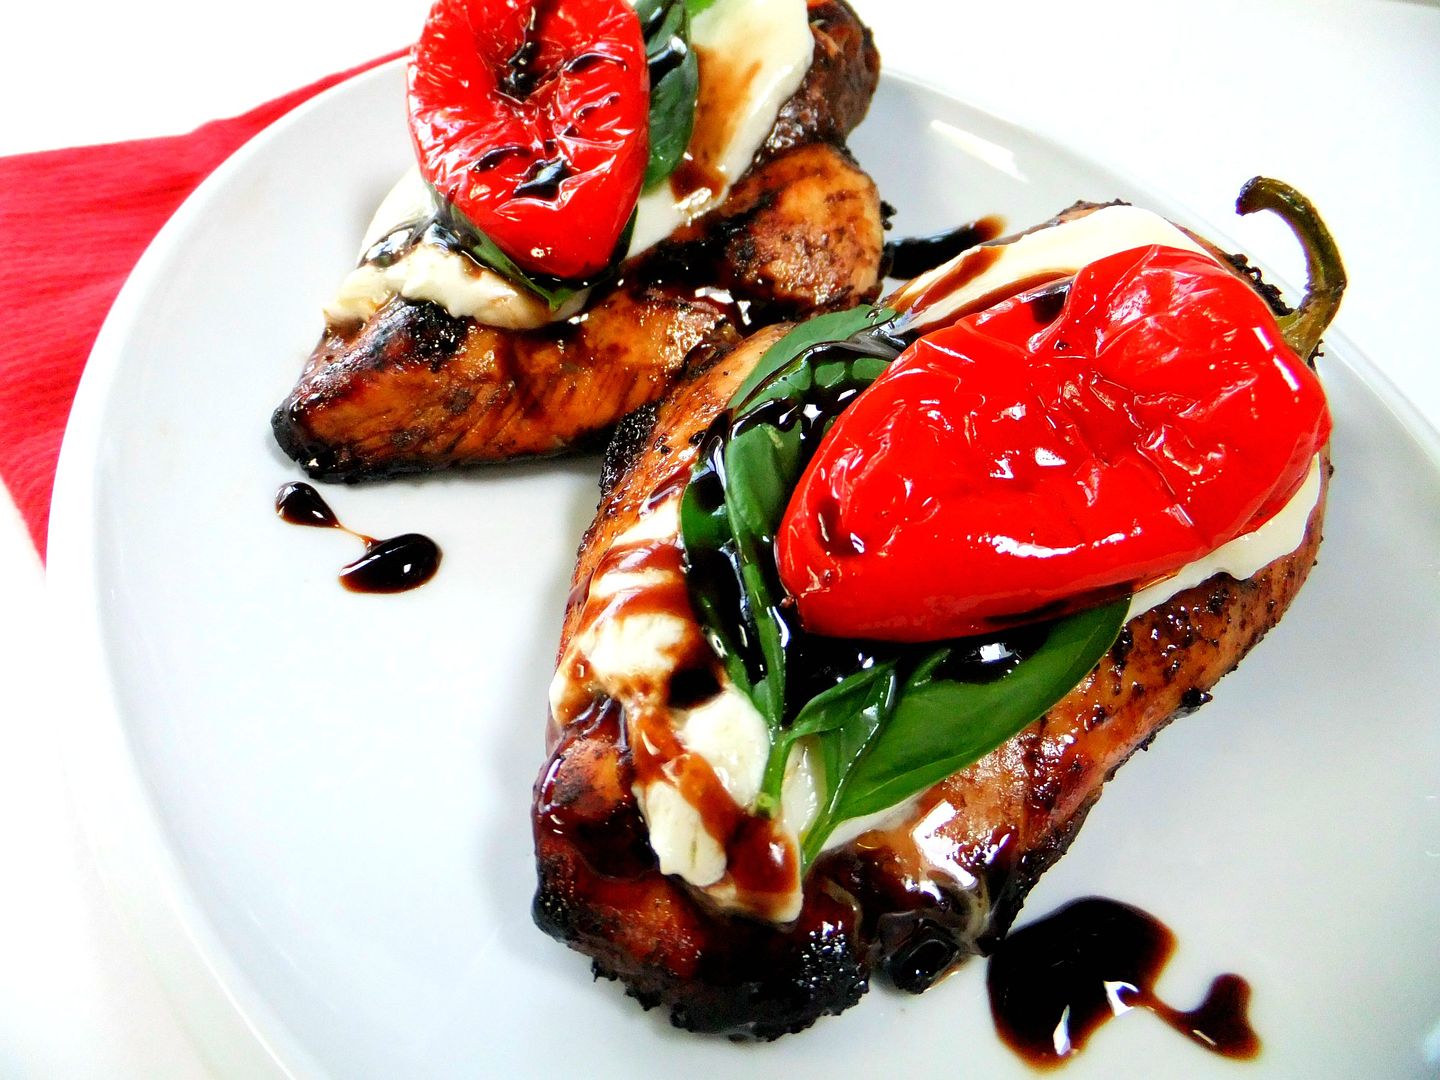 Balsamic Reduction Sauce For Chicken